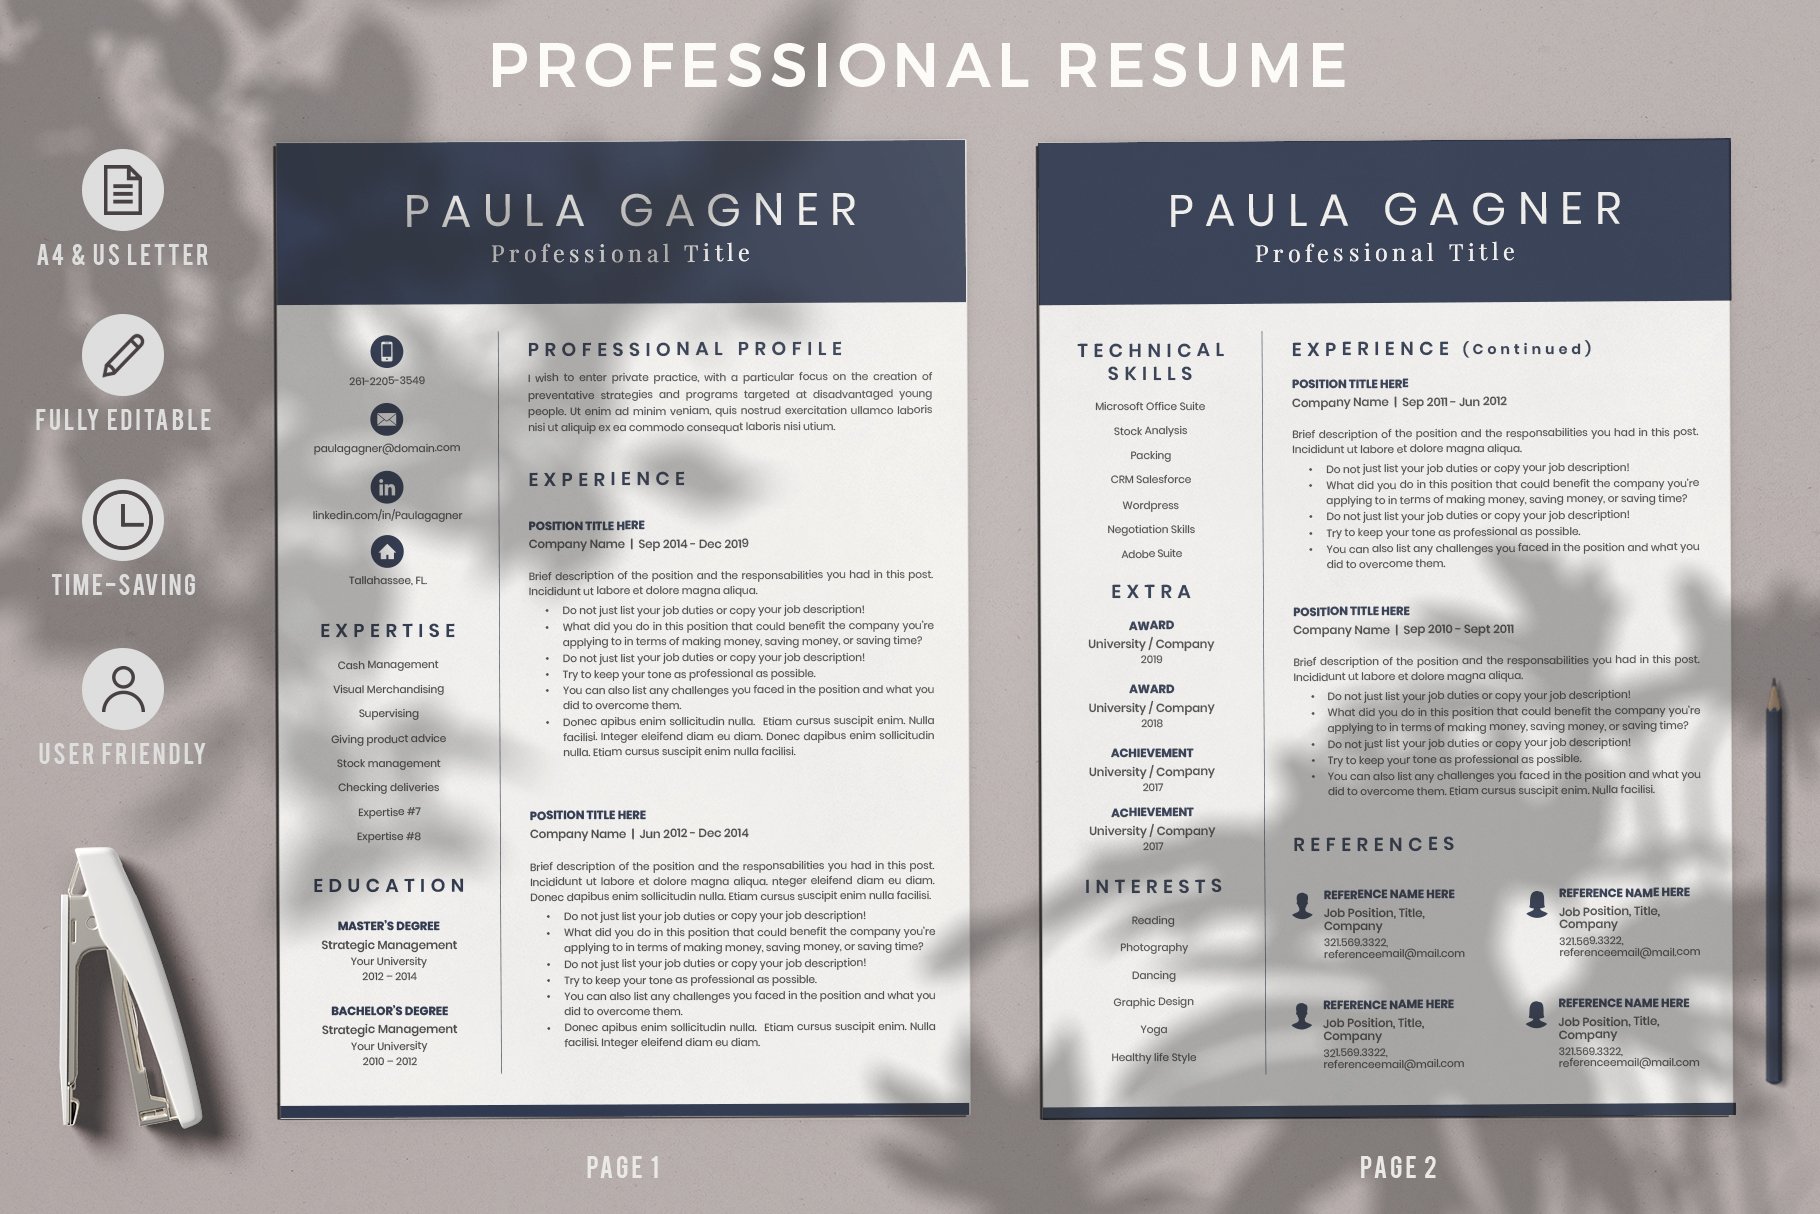 Accountant Resume CV with Experience preview image.